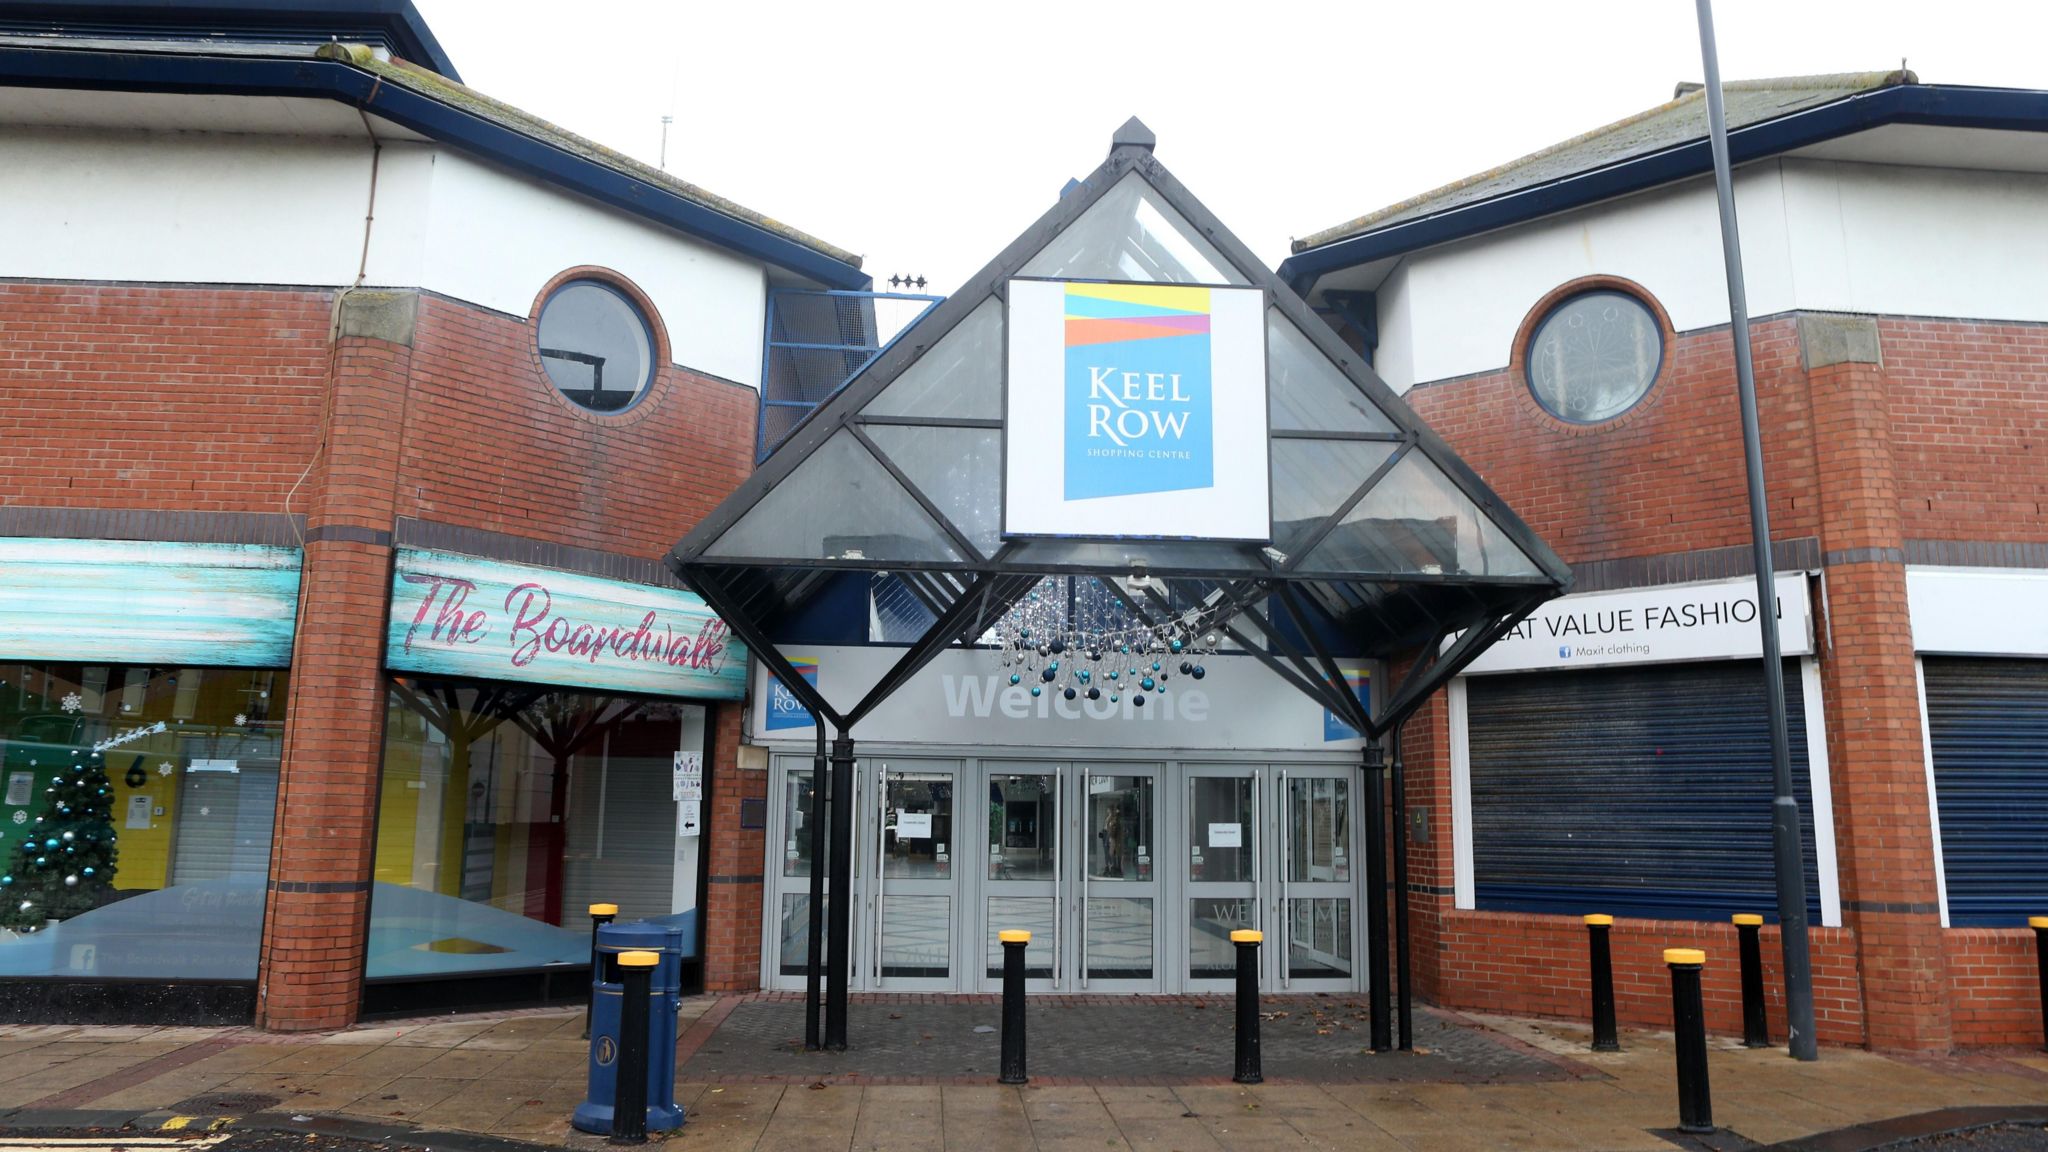 Keel Row Shopping Centre, in Blyth